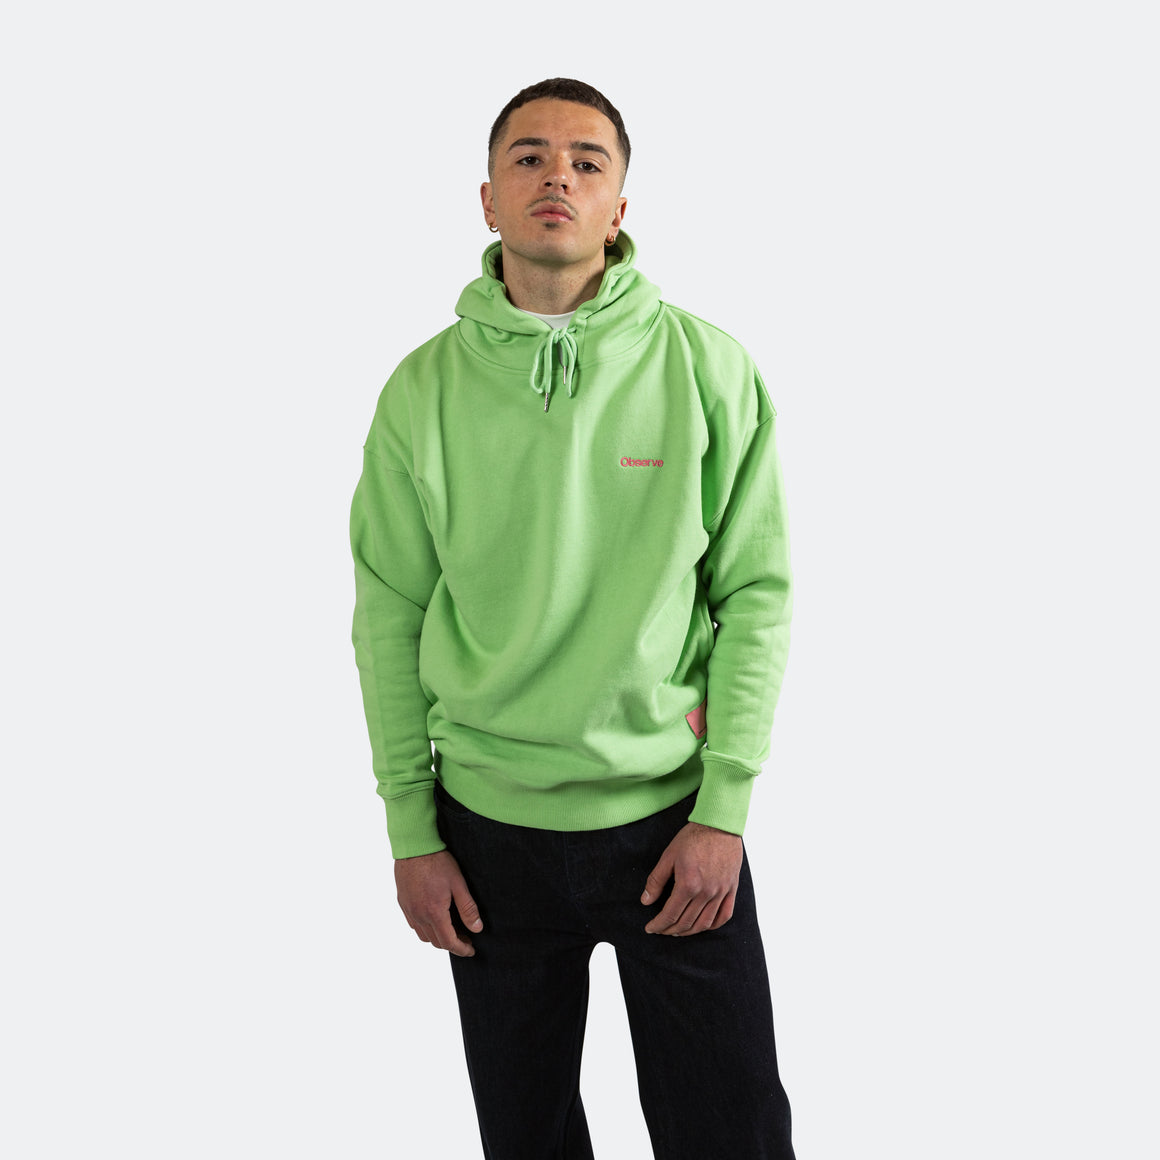 Observe - Classic Logo Hood - Lime Green - UP THERE